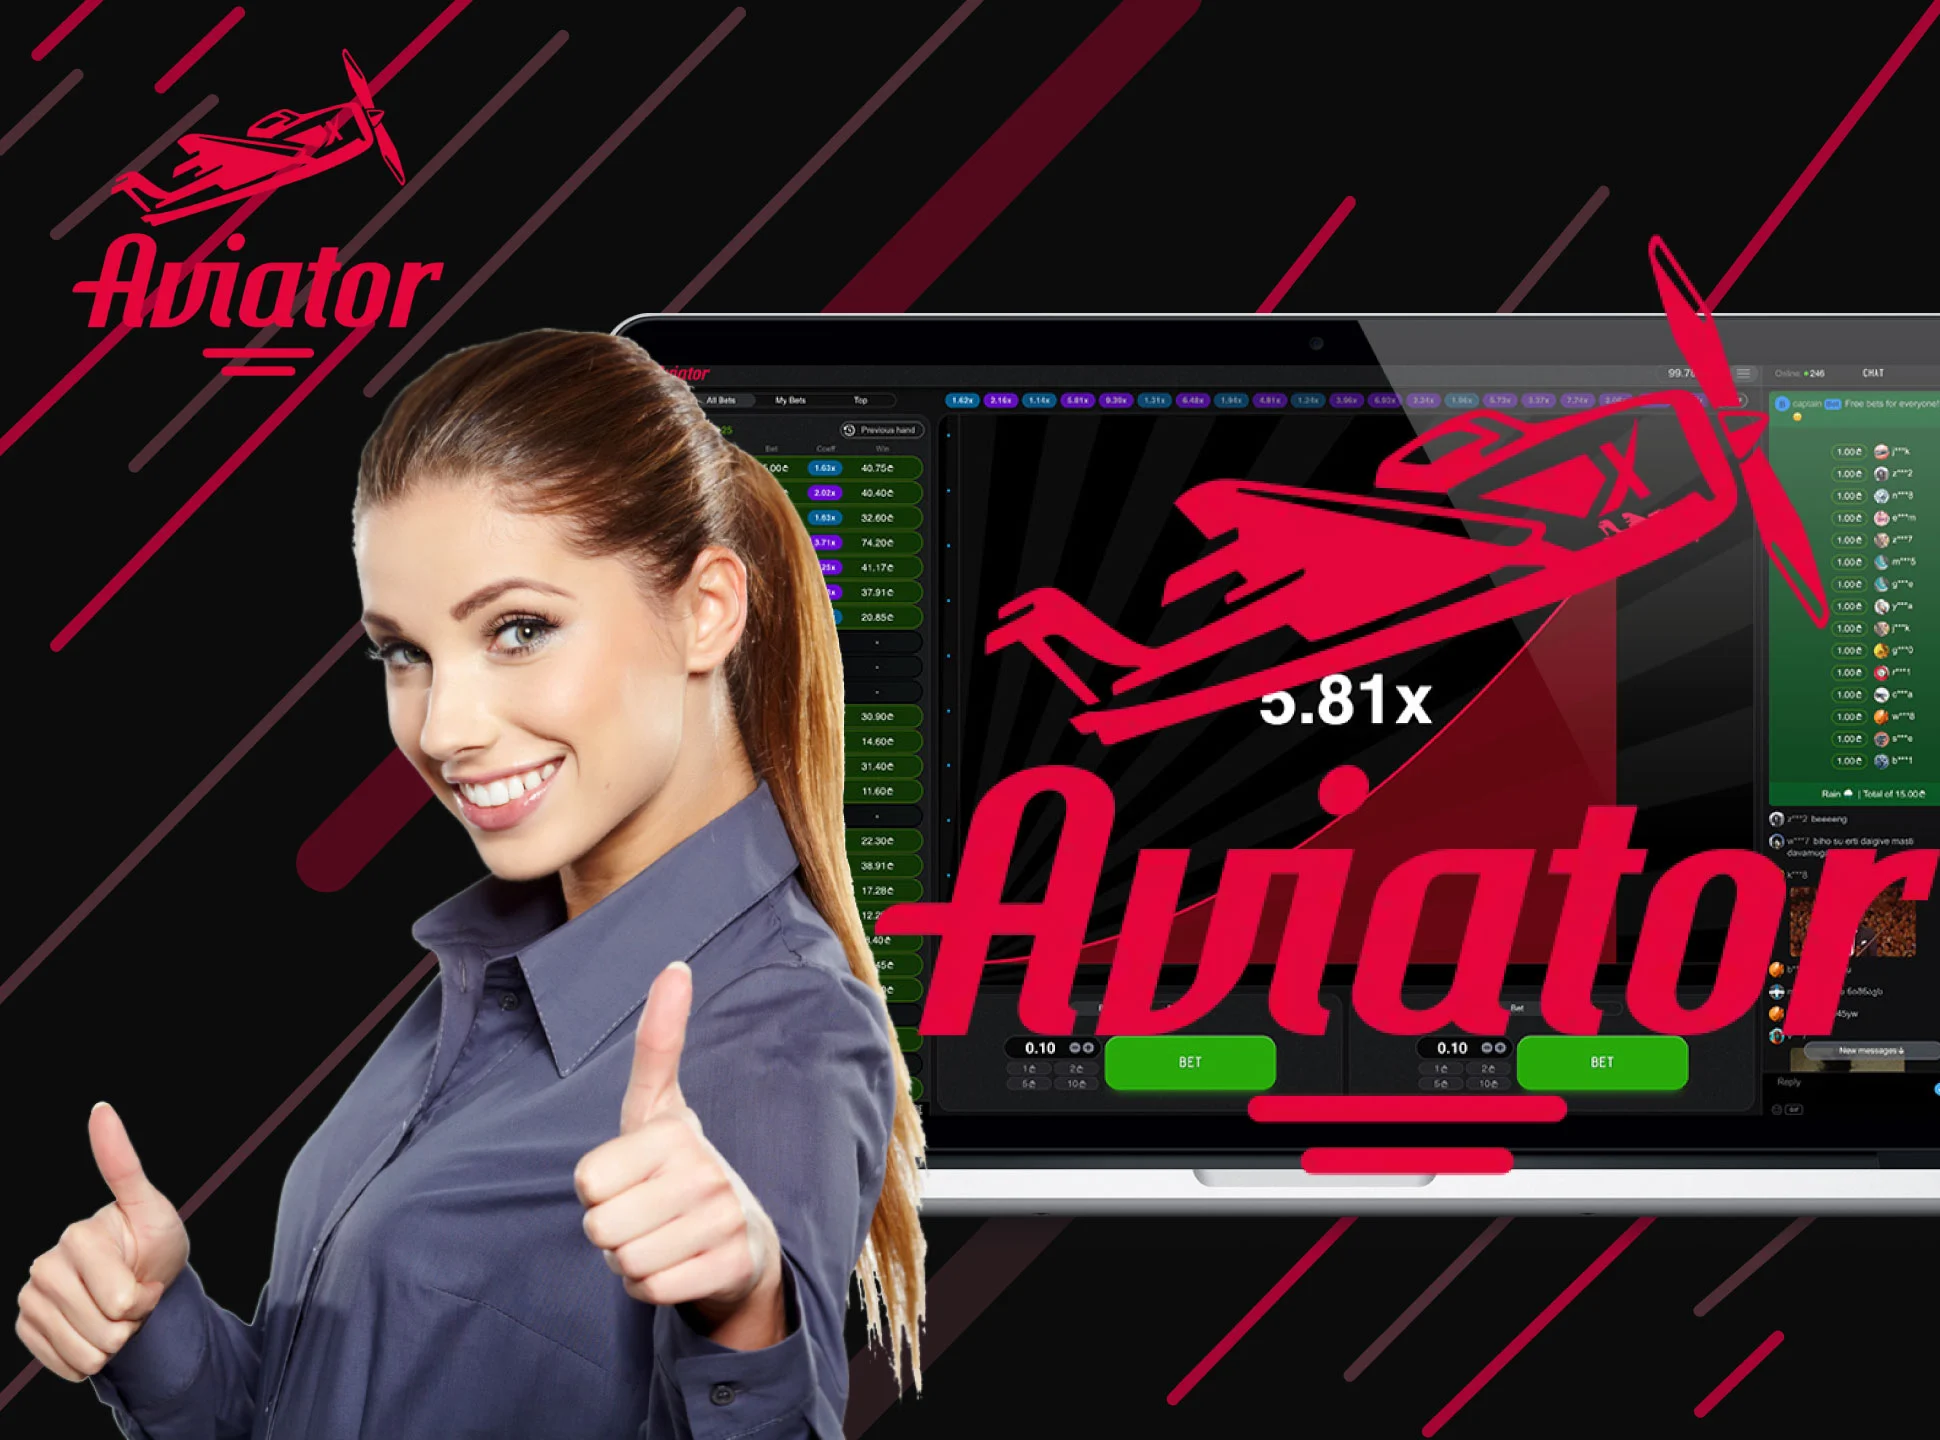 Aviator is a well-known game that can hekp to only entertain you but also earn some money.